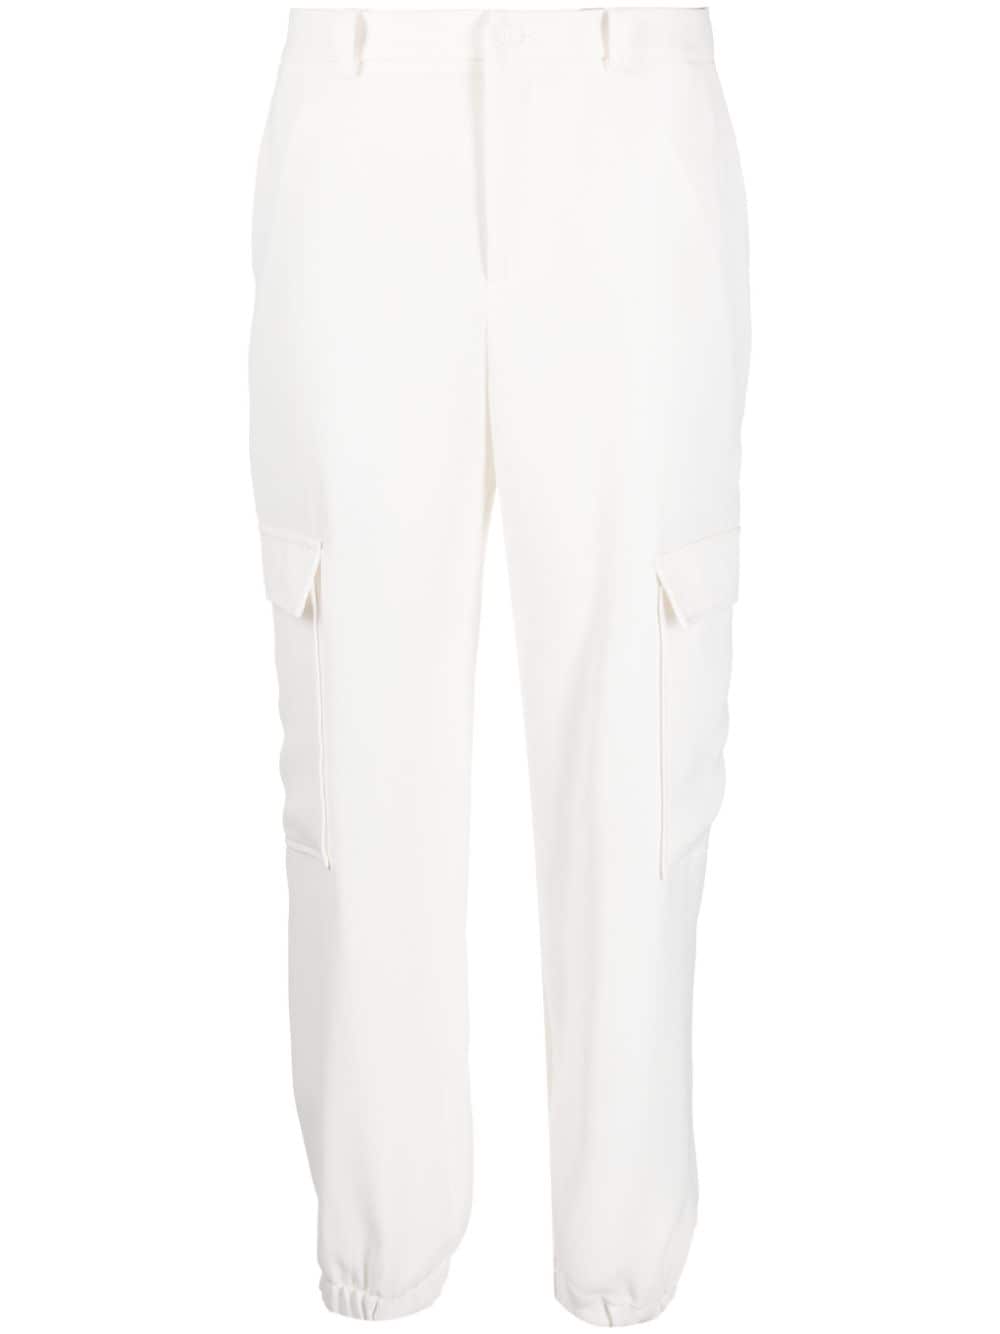 P.A.R.O.S.H. tapered cargo trousers - White von P.A.R.O.S.H.